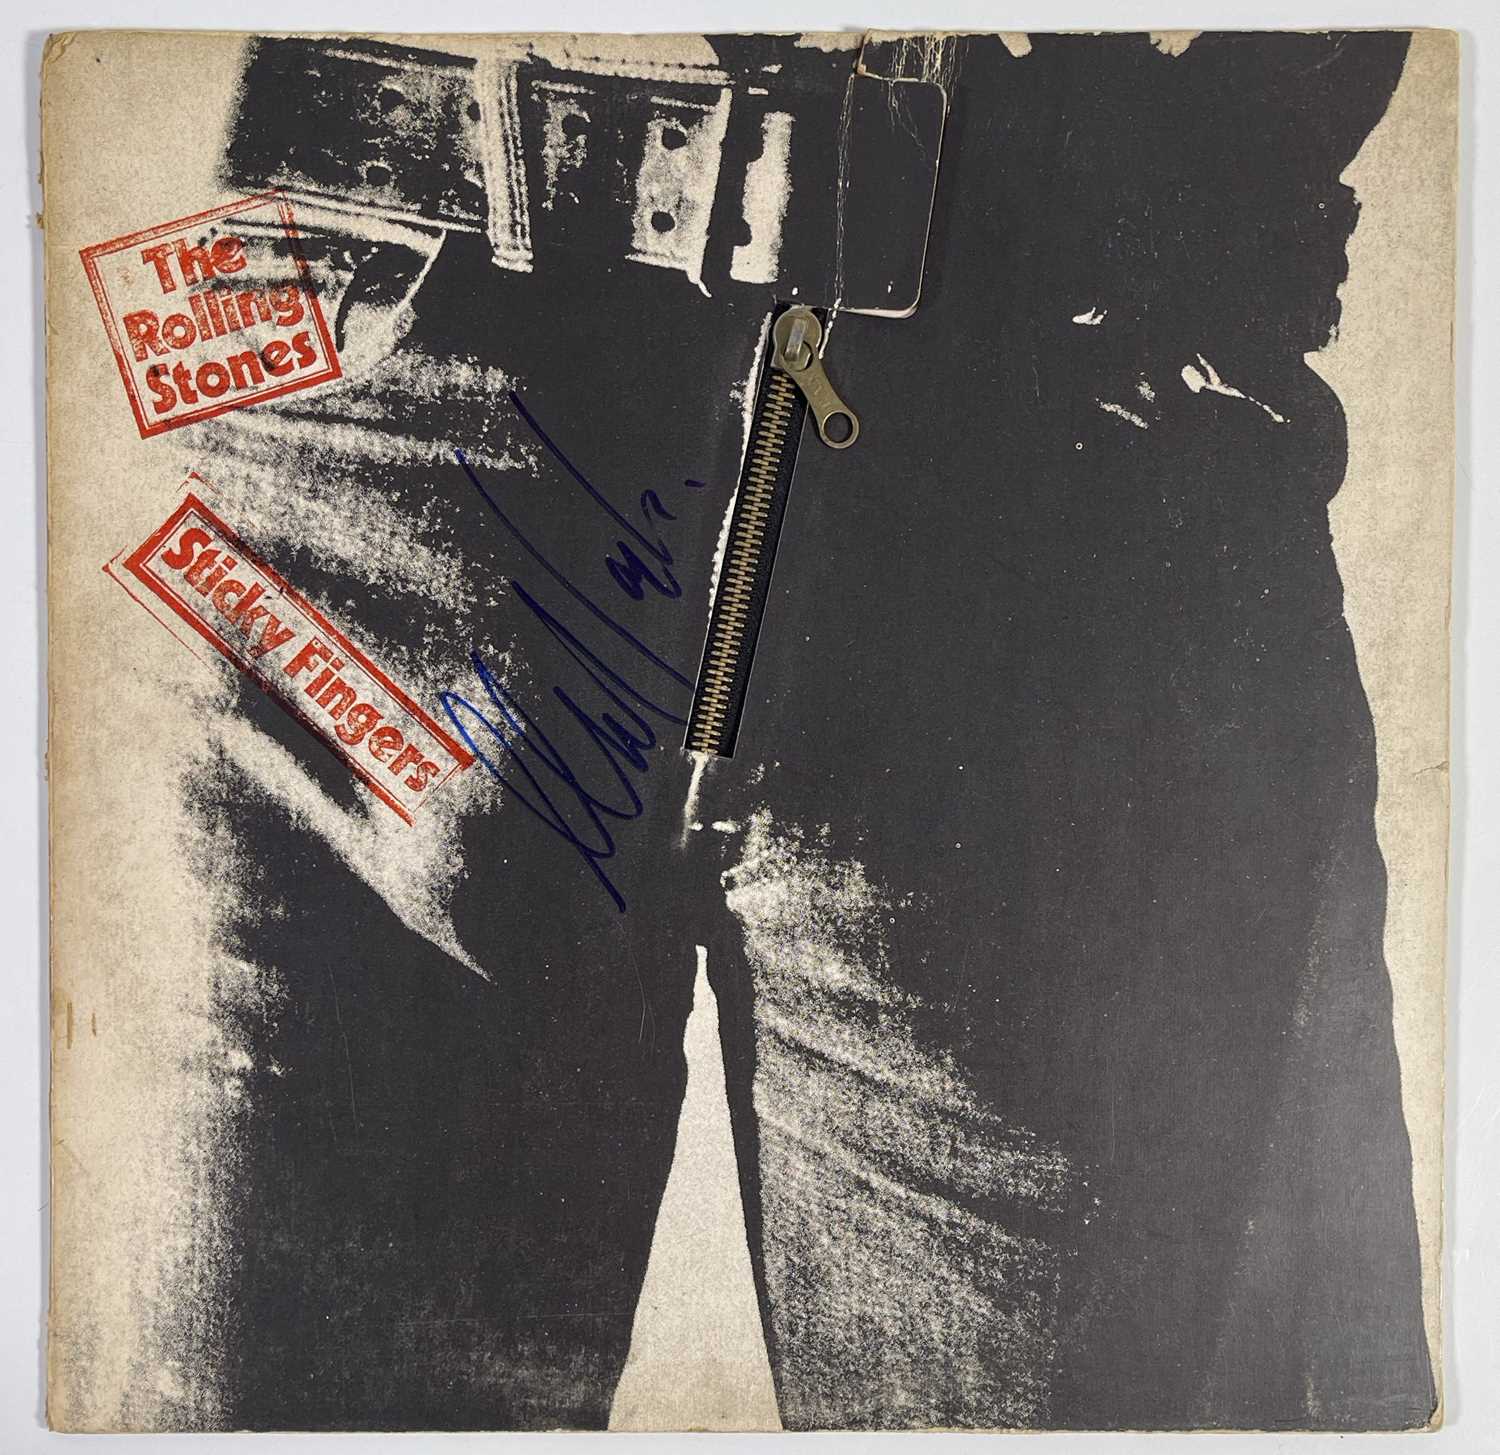 THE ROLLING STONES - STICKY FINGERS (LARGE ZIP) SIGNED BY MICK TAYLOR.